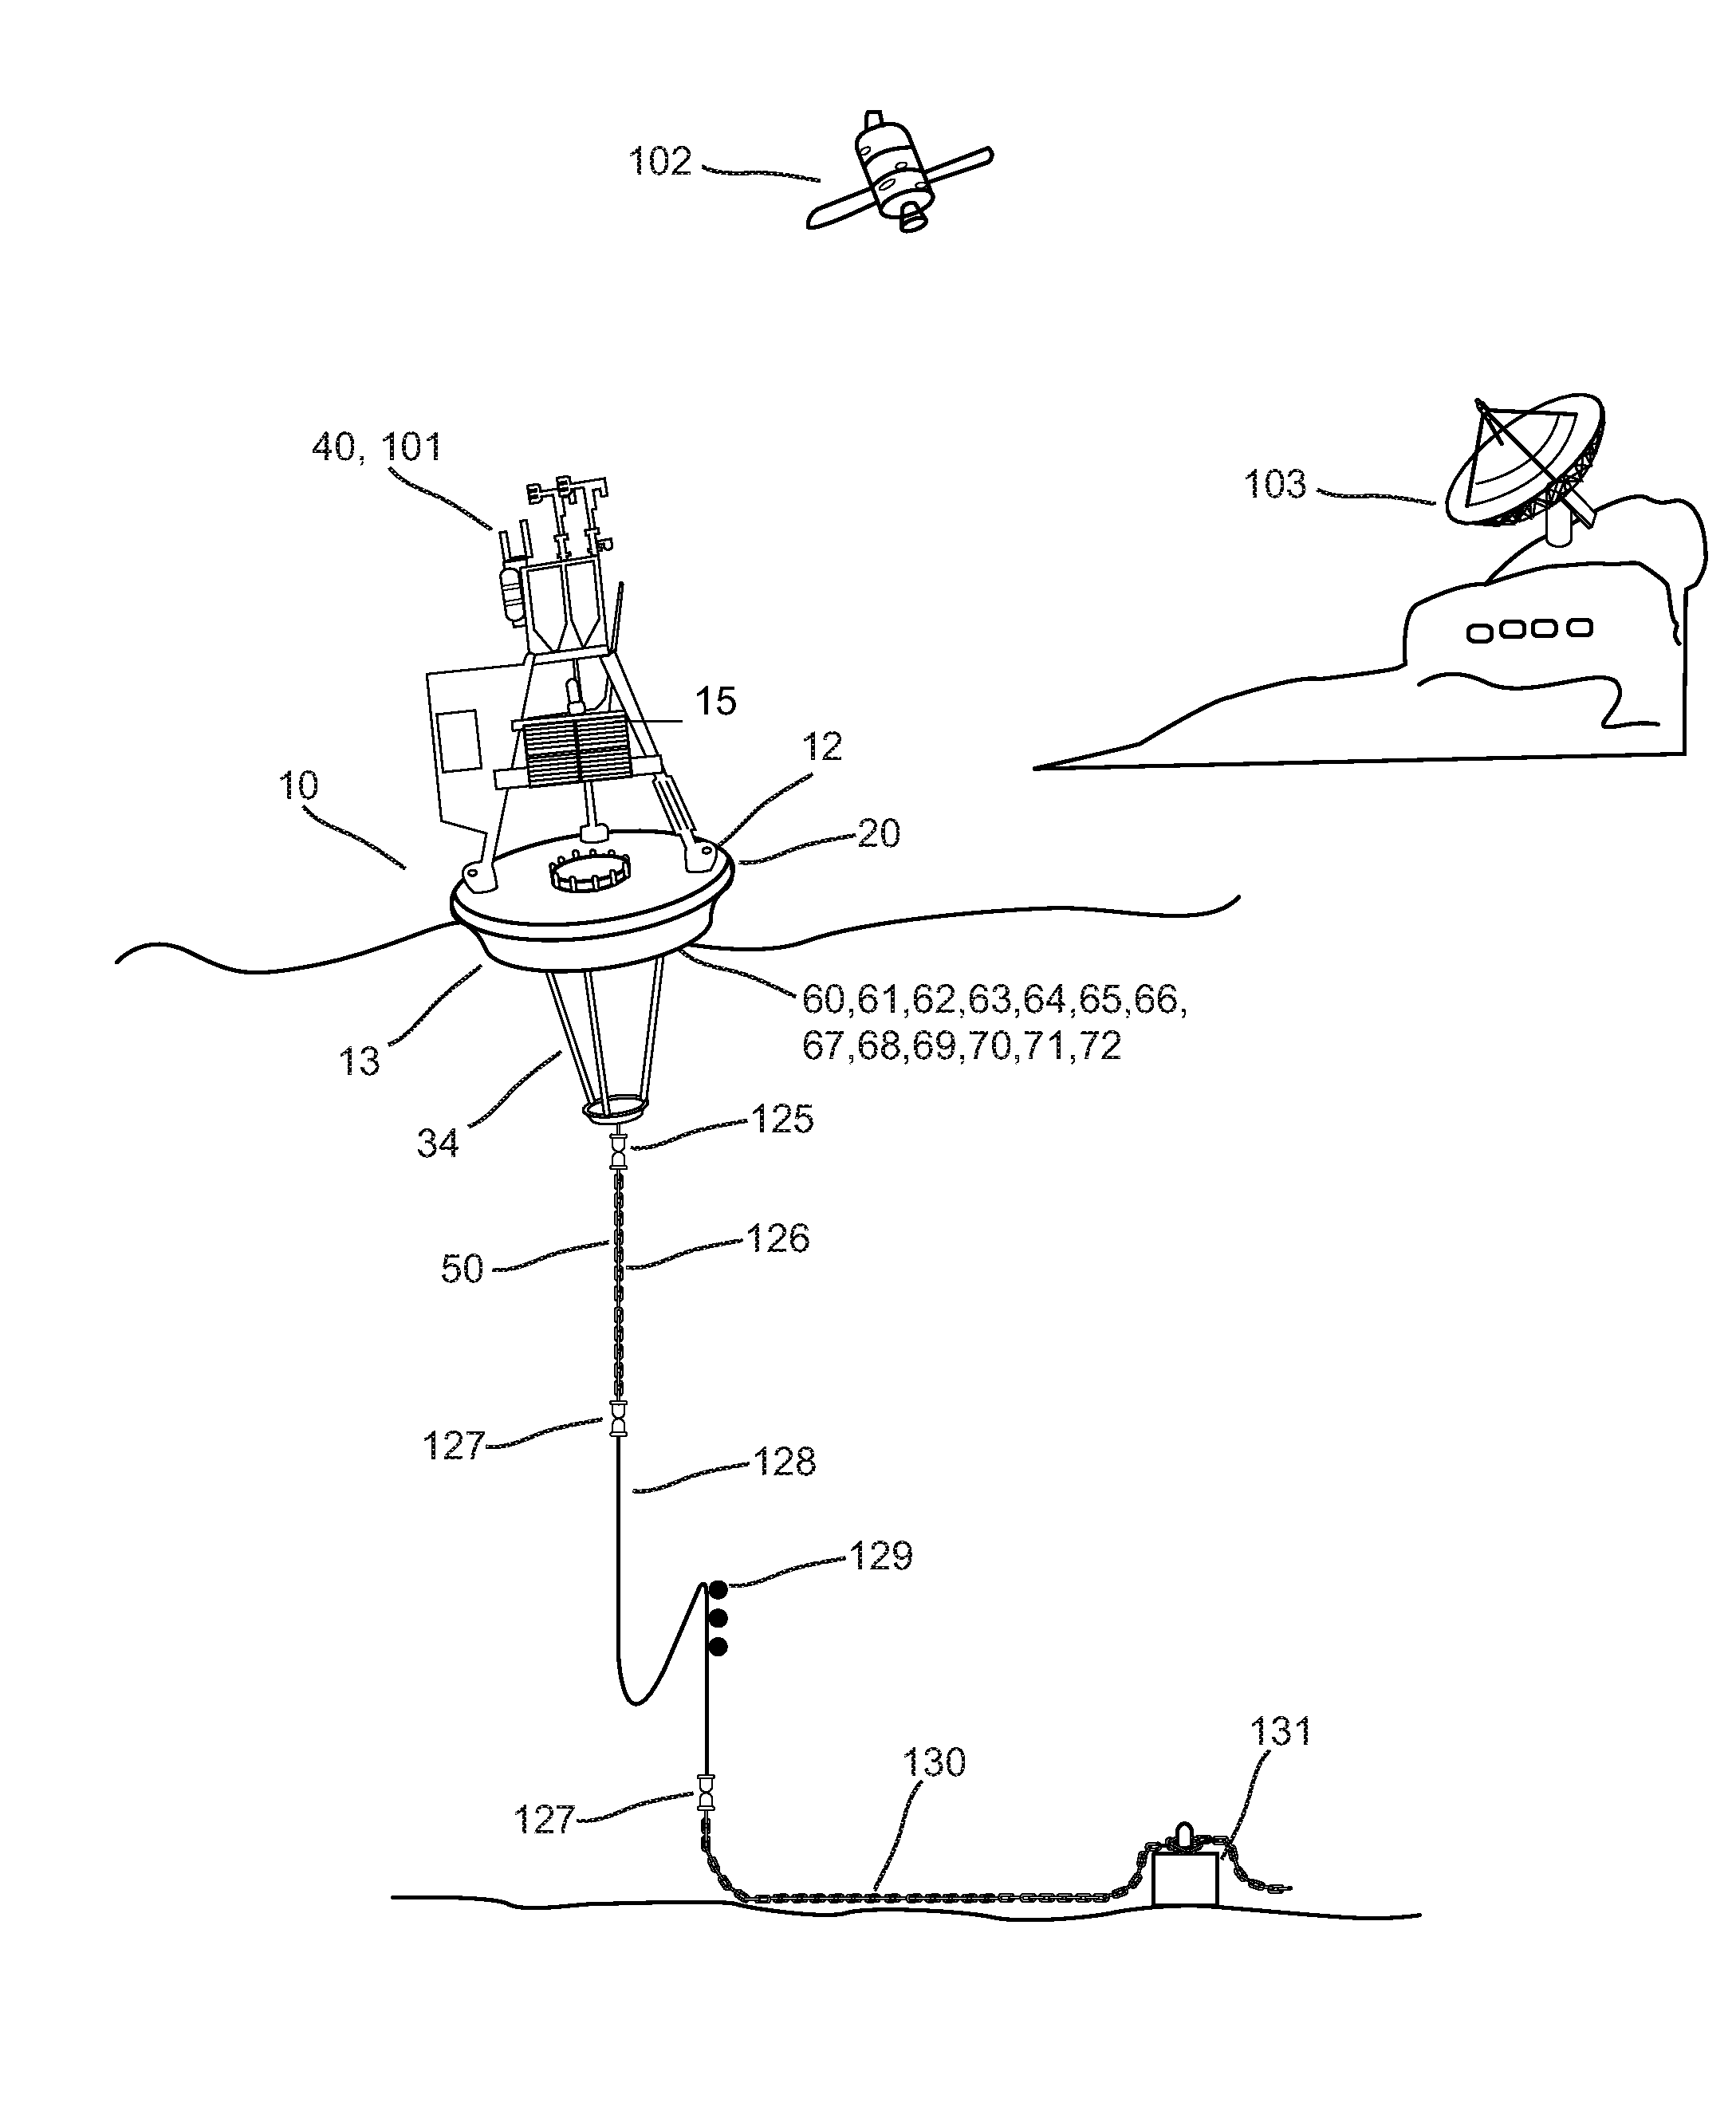 System for monitoring, determining, and reporting directional spectra of ocean surface waves in near real-time from a moored buoy